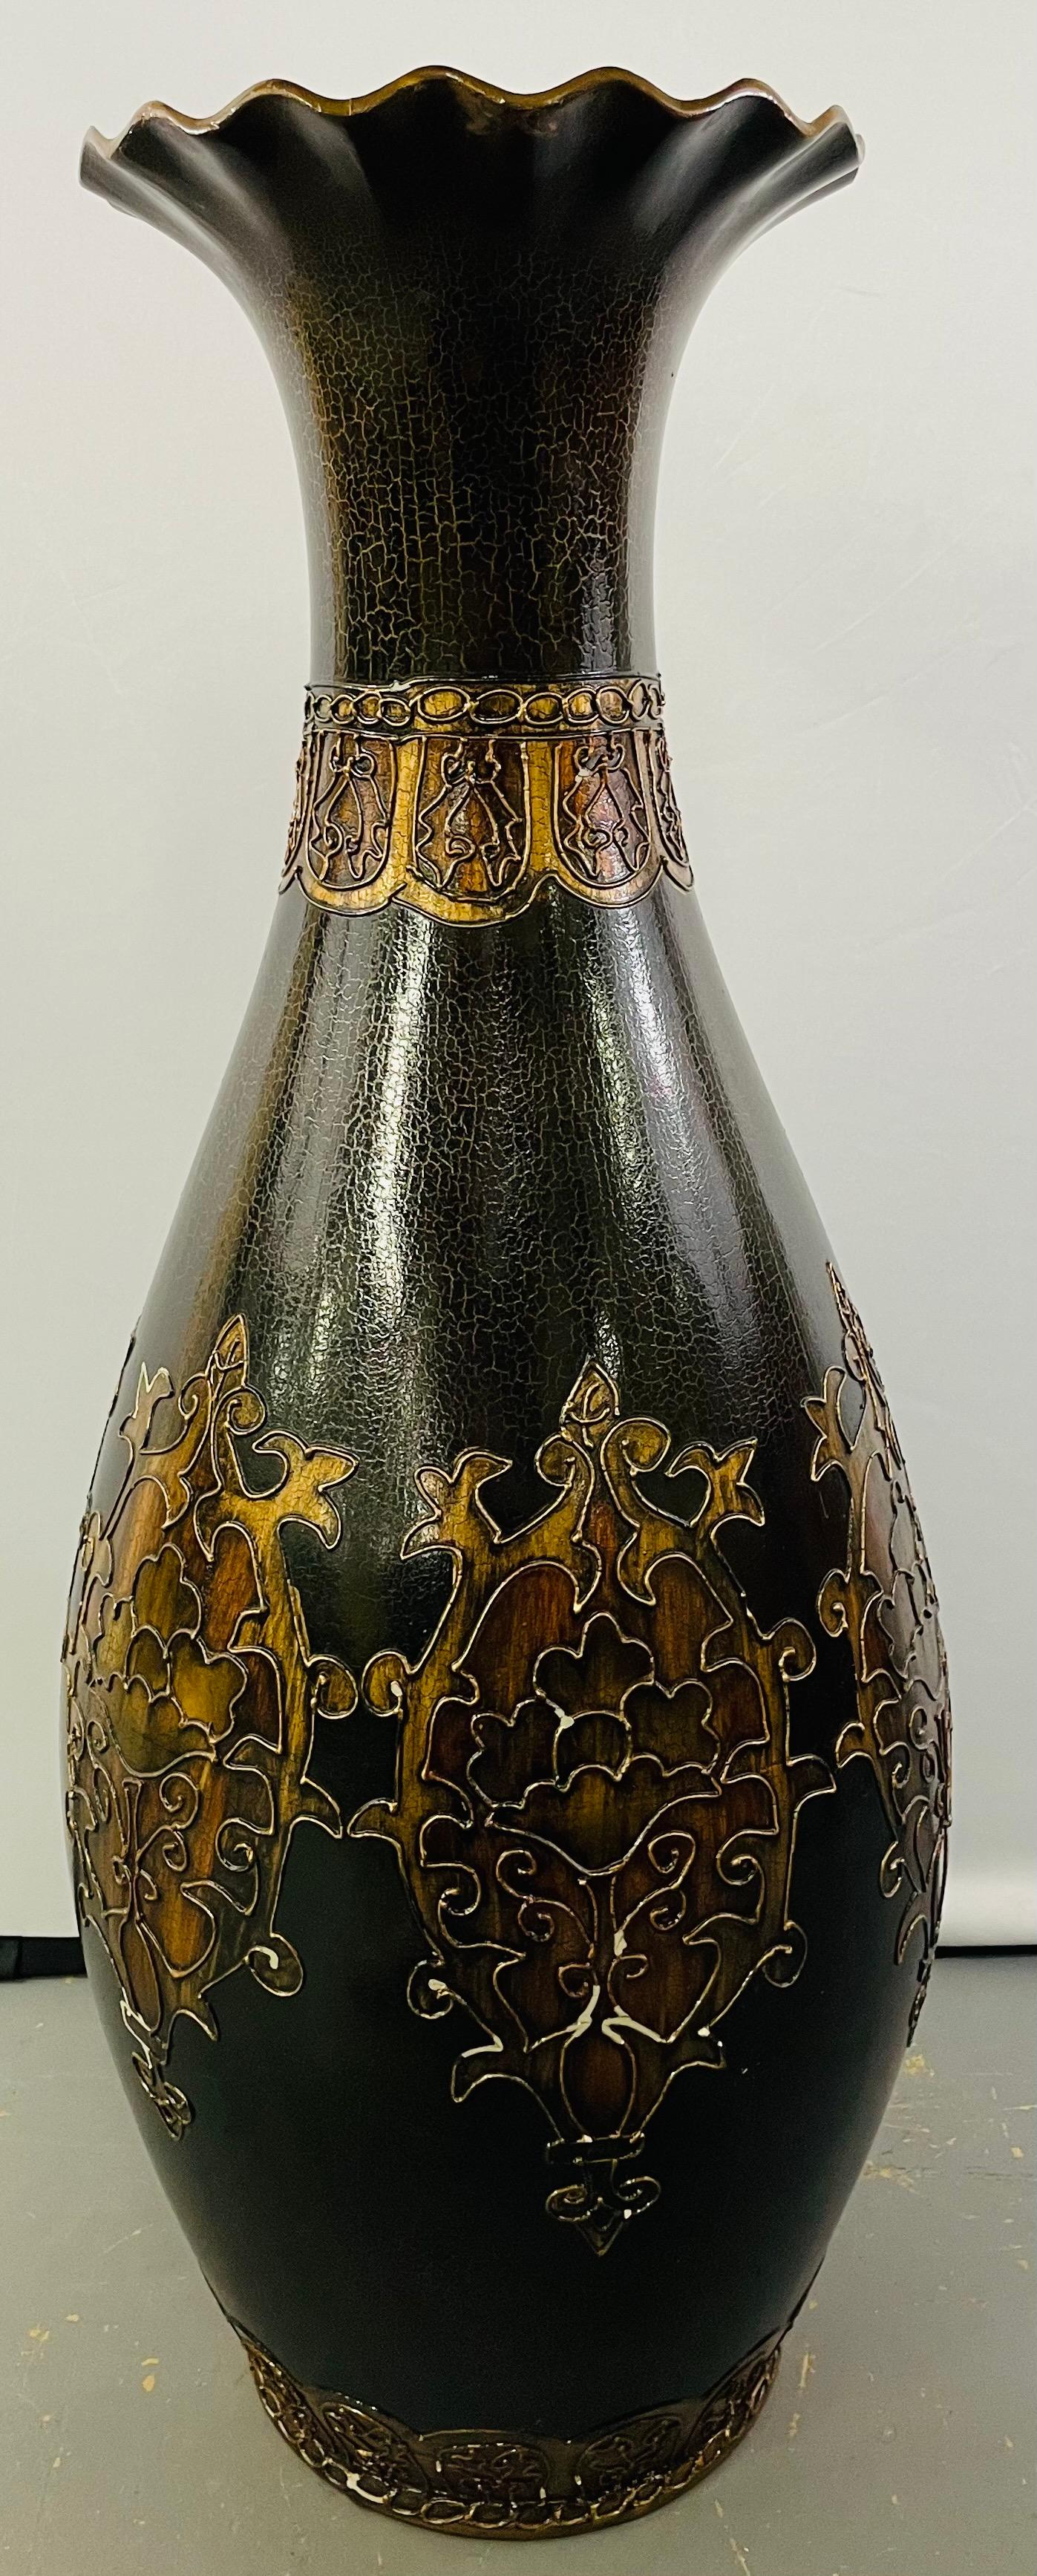 A monumental Art Nouveau Black and Gold  enameled vase featuring fine floral etching design painted in an antiqued gold tone color around the body and the neck of the vase. The vase shows a natural craquelure on the paint as a result of aging which